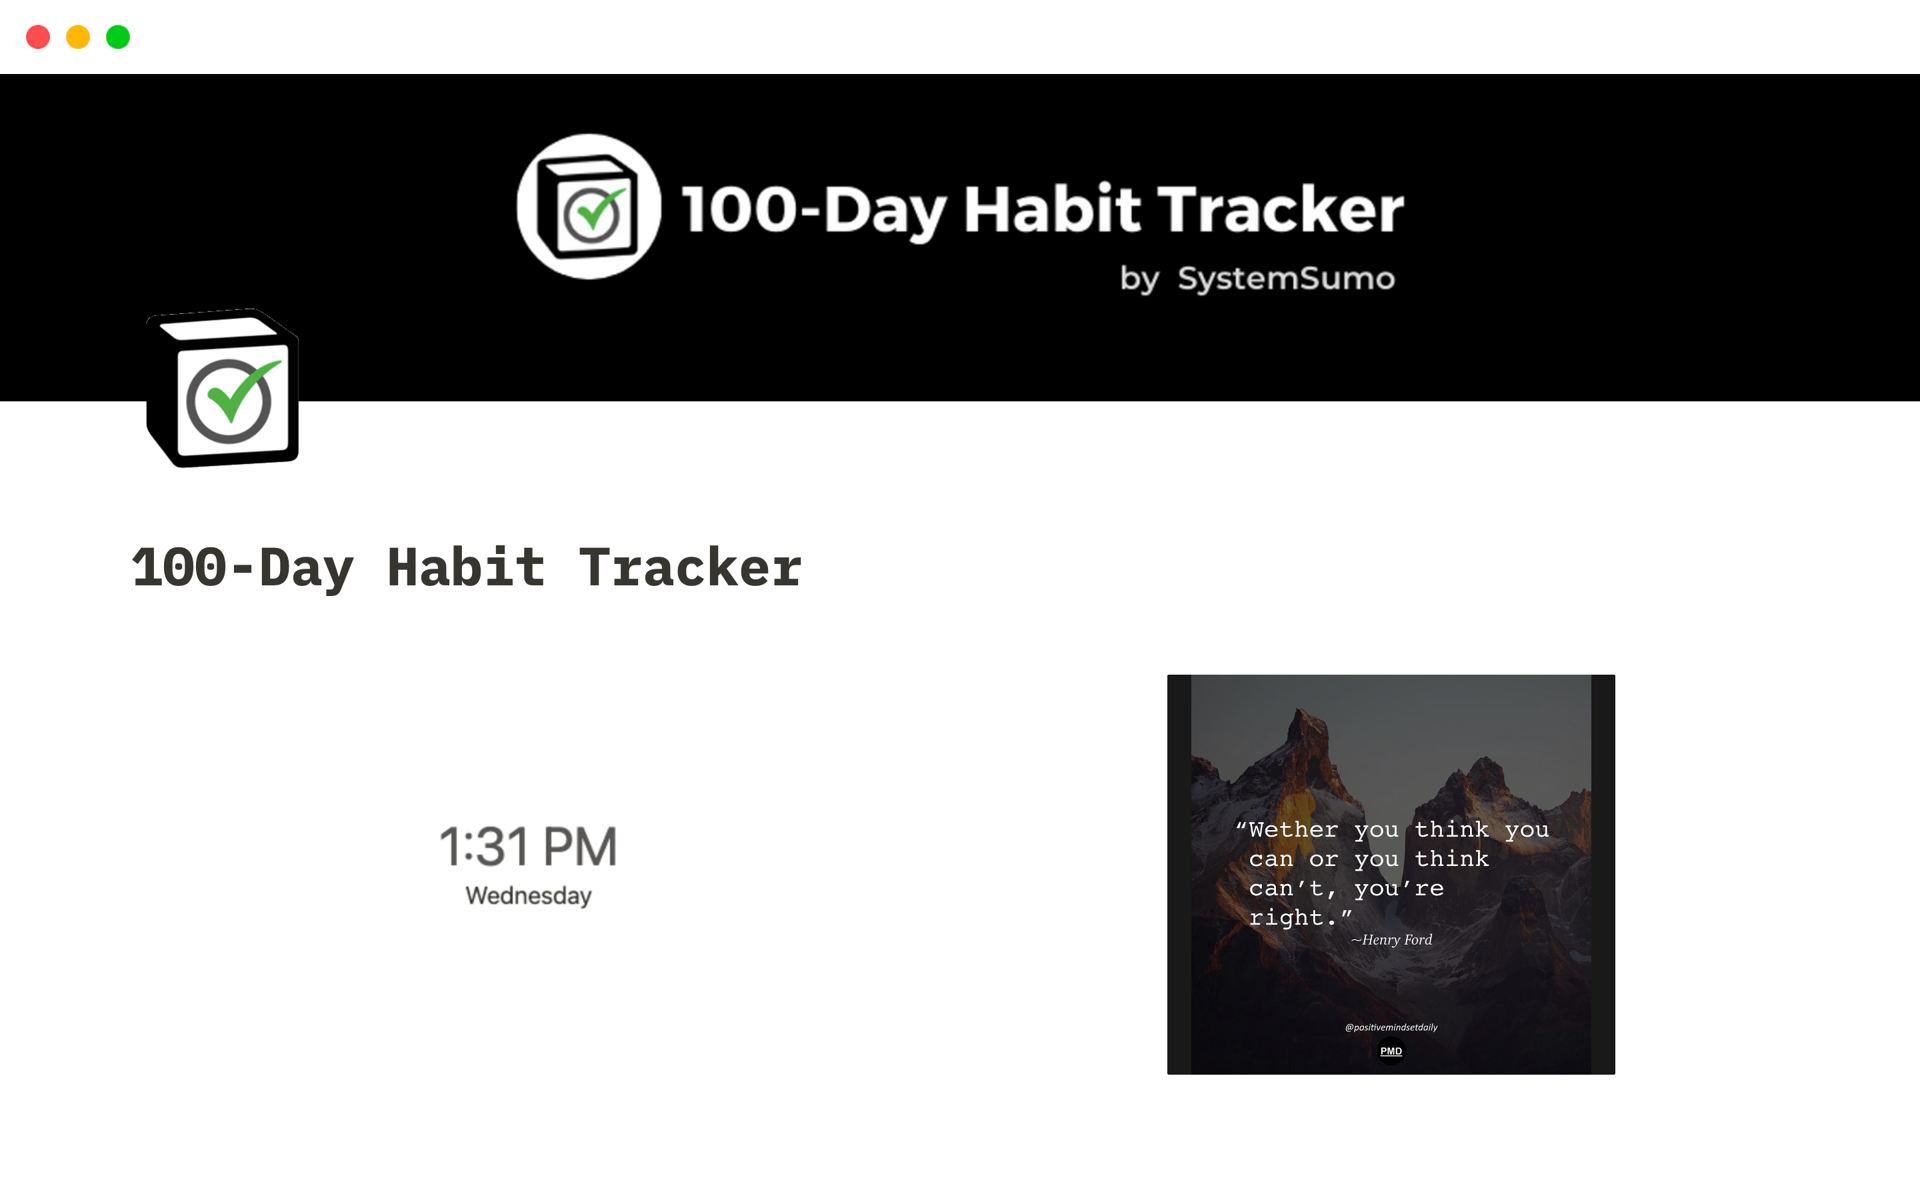 Build life-long habits within 100 days and track your progress to success.